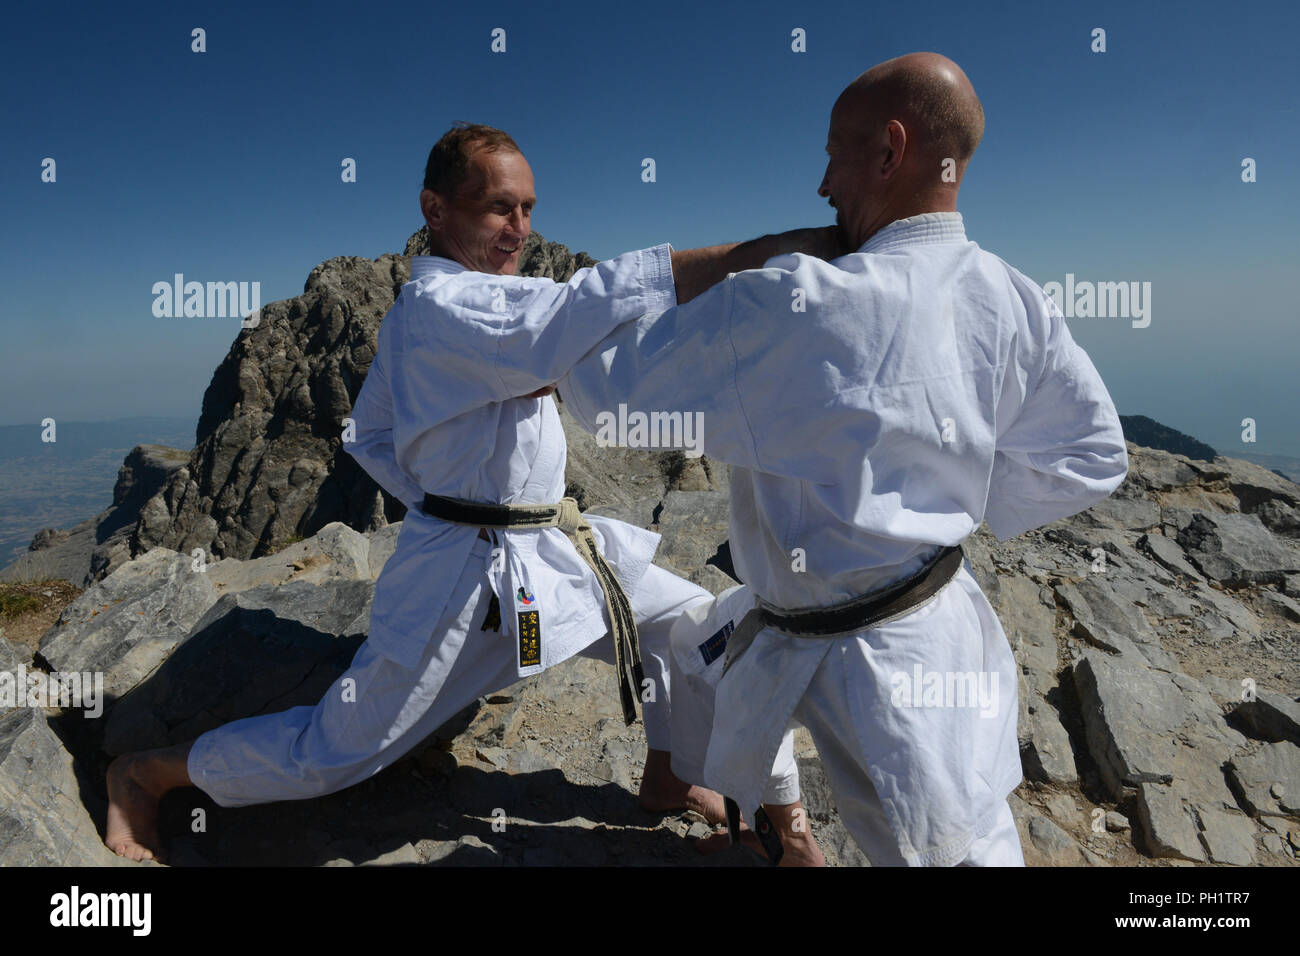 Karate performance in front of the peak of Mount Olymp, Green Stock Photo